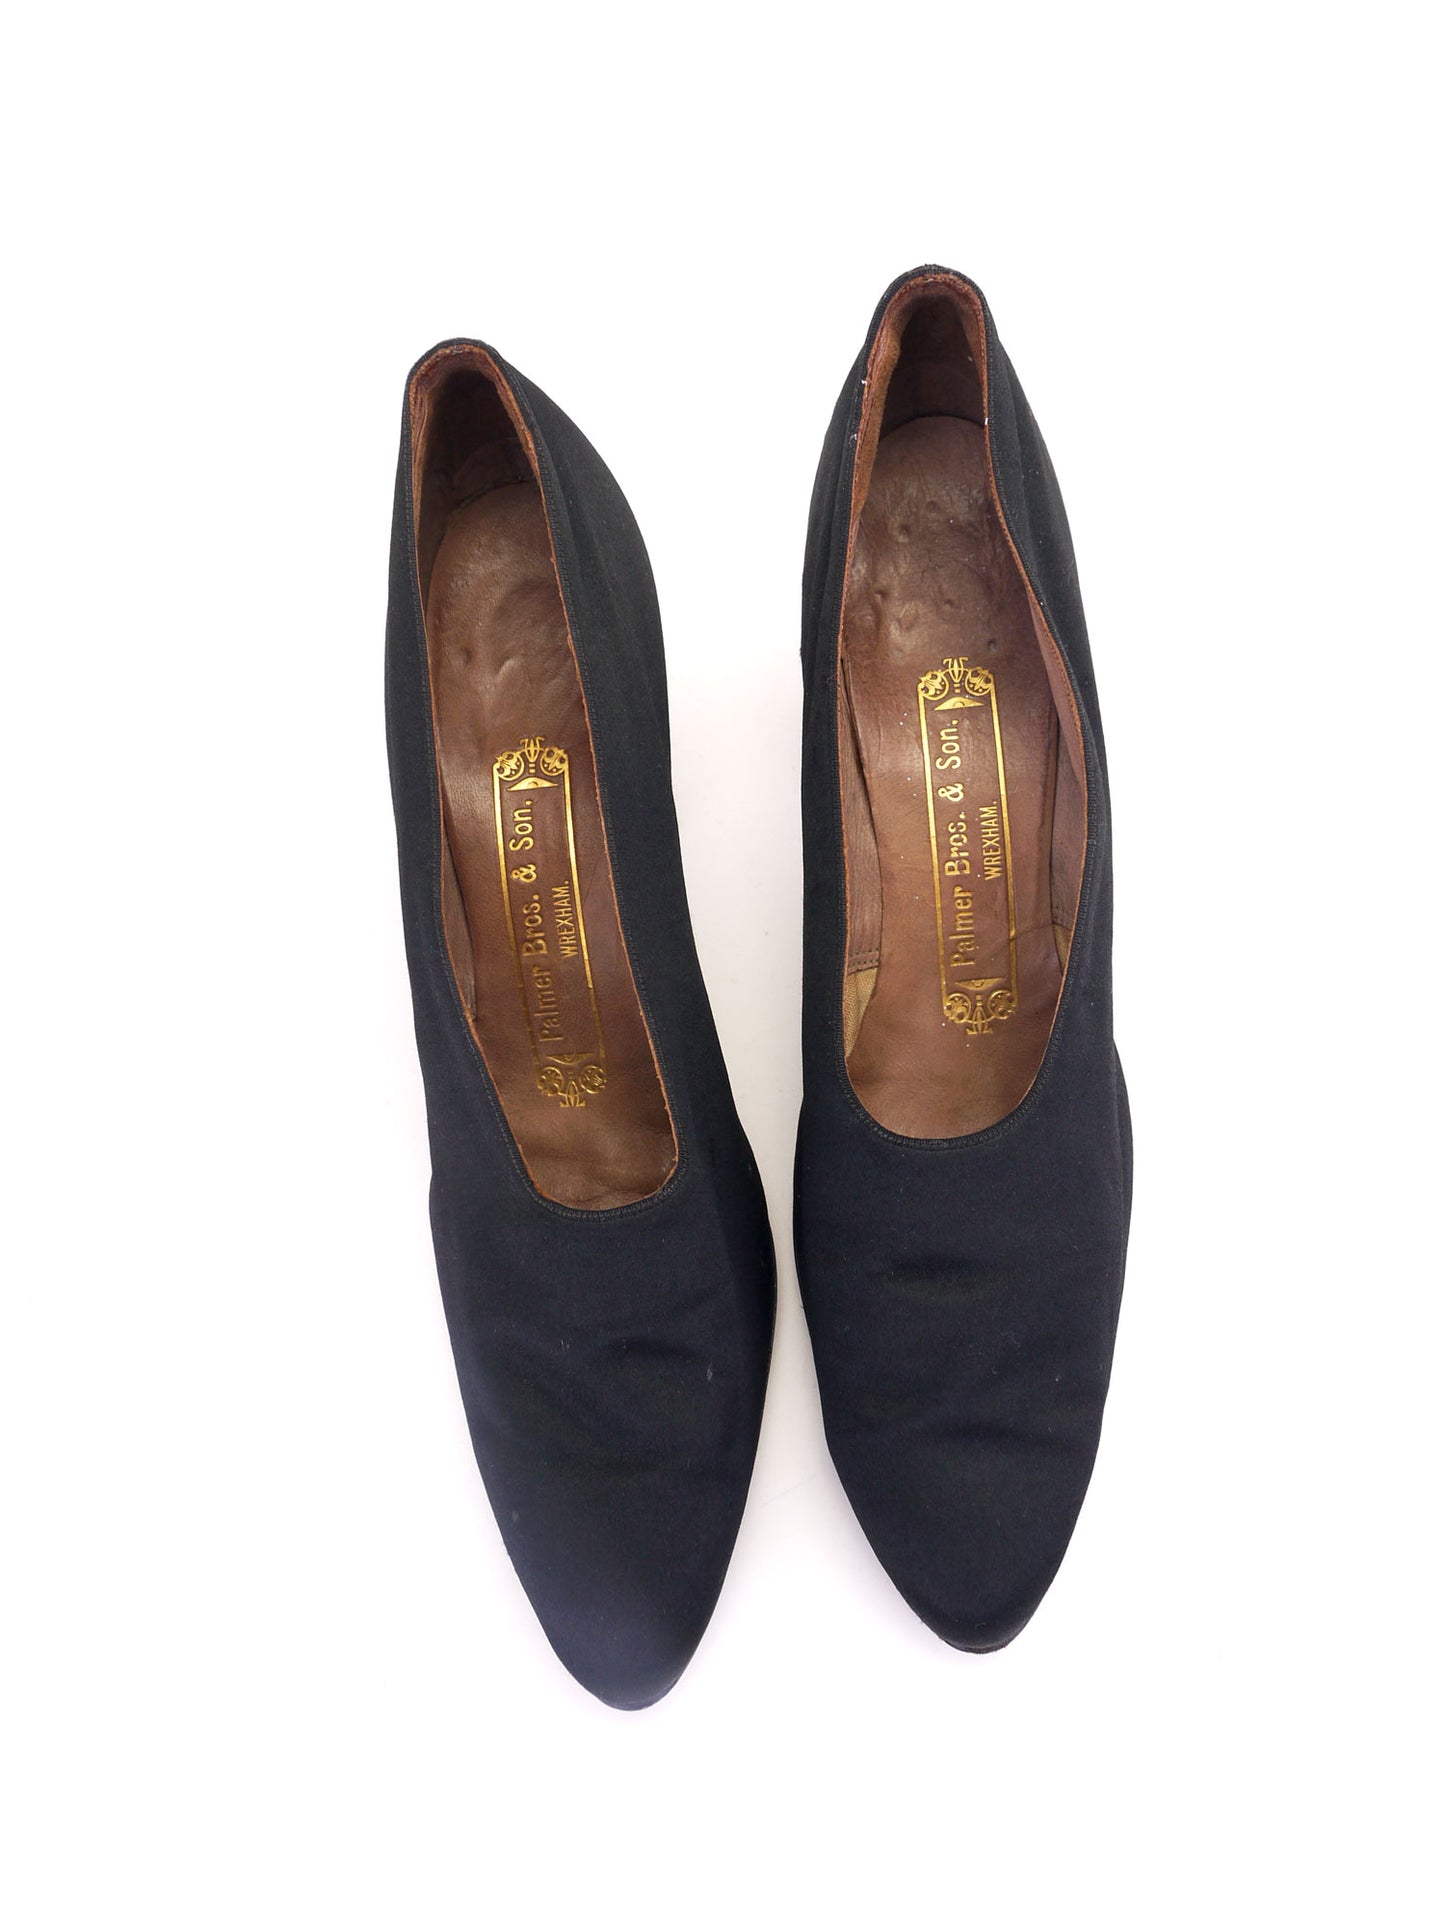 Superb Early 1920s One Piece Silk Pumps by Palmer Bros UK 3